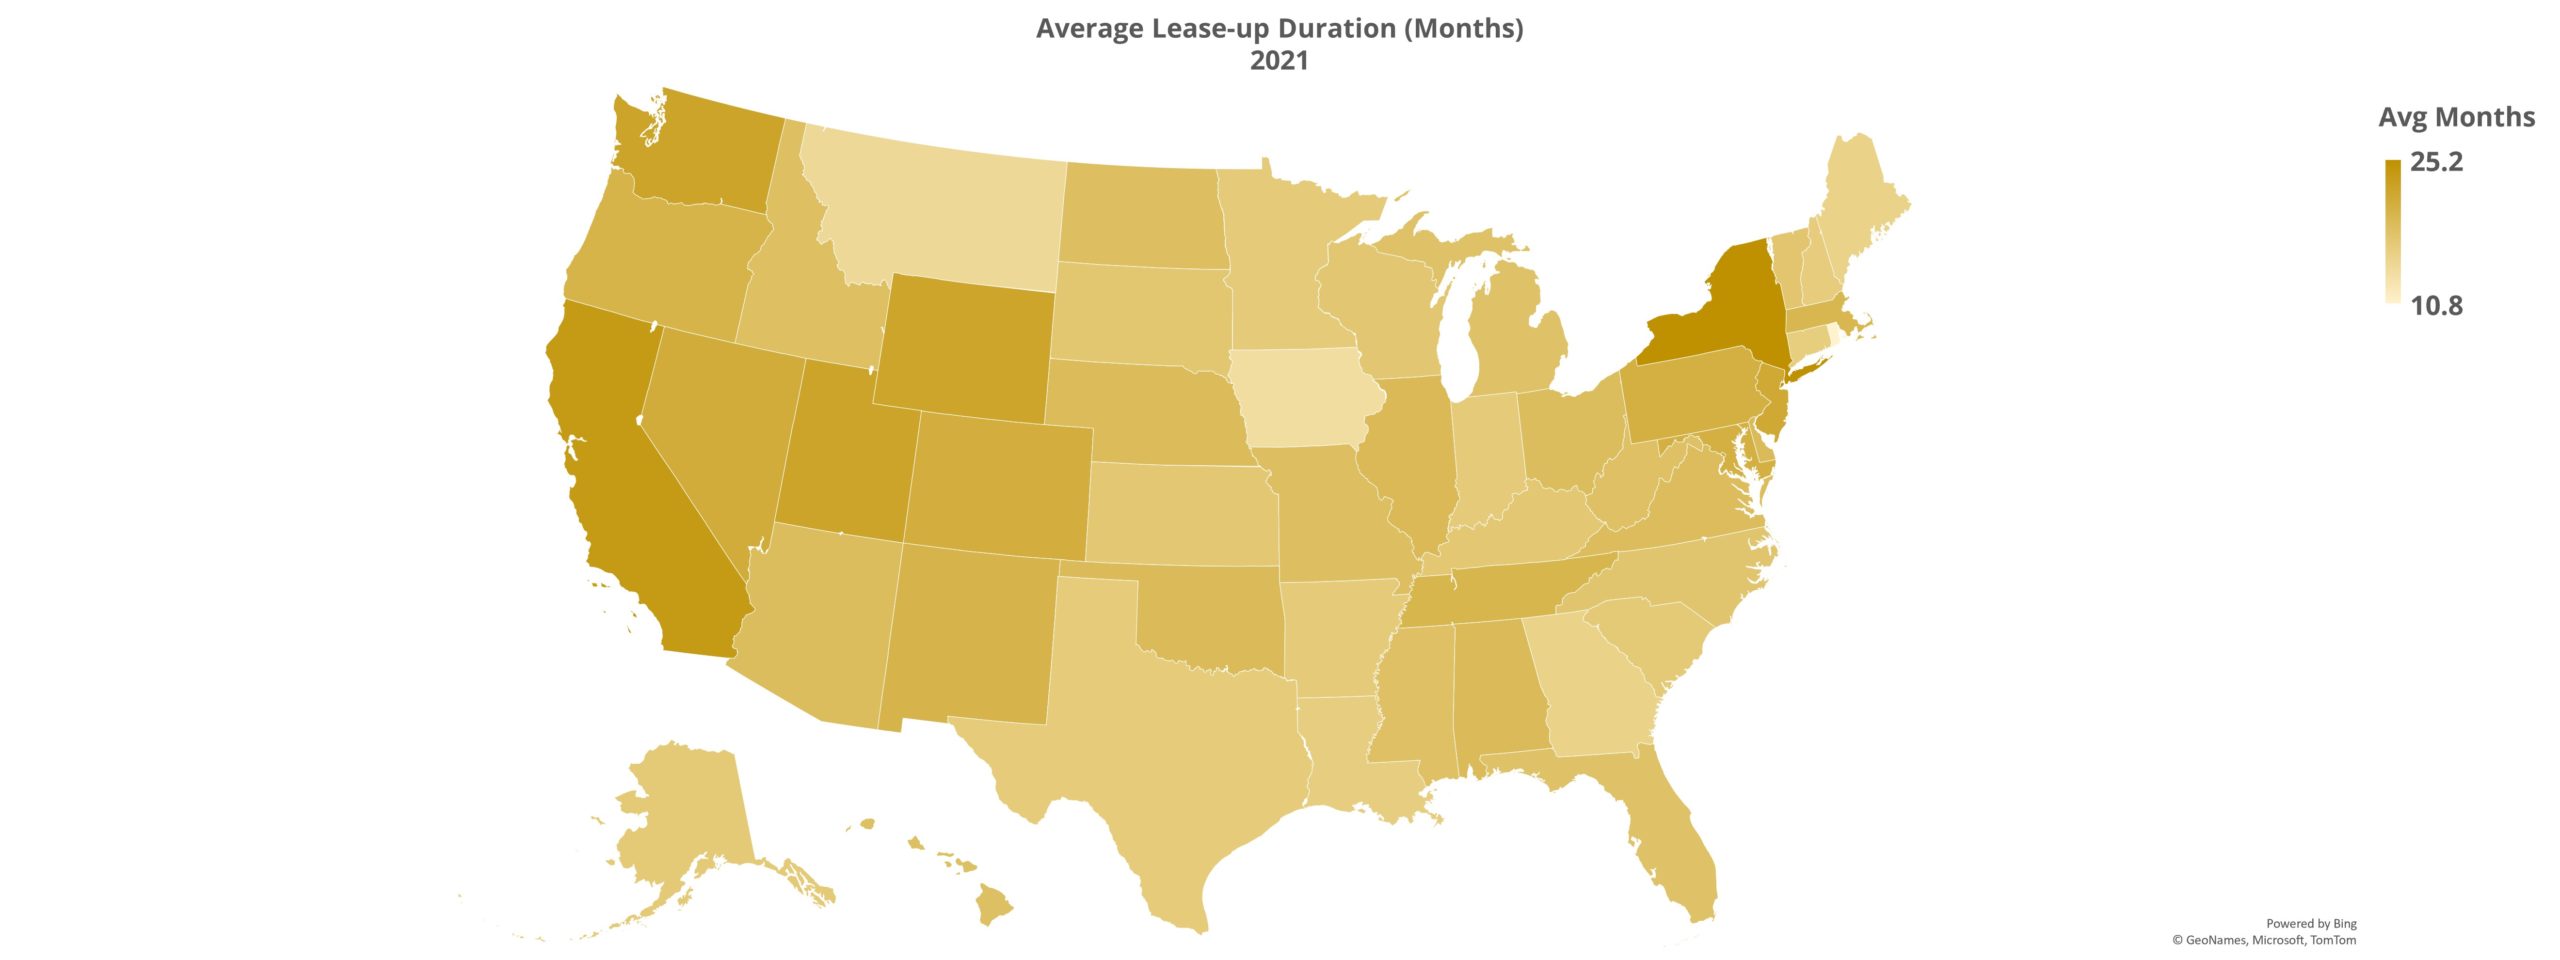 Average Lease-up Duation (Months)